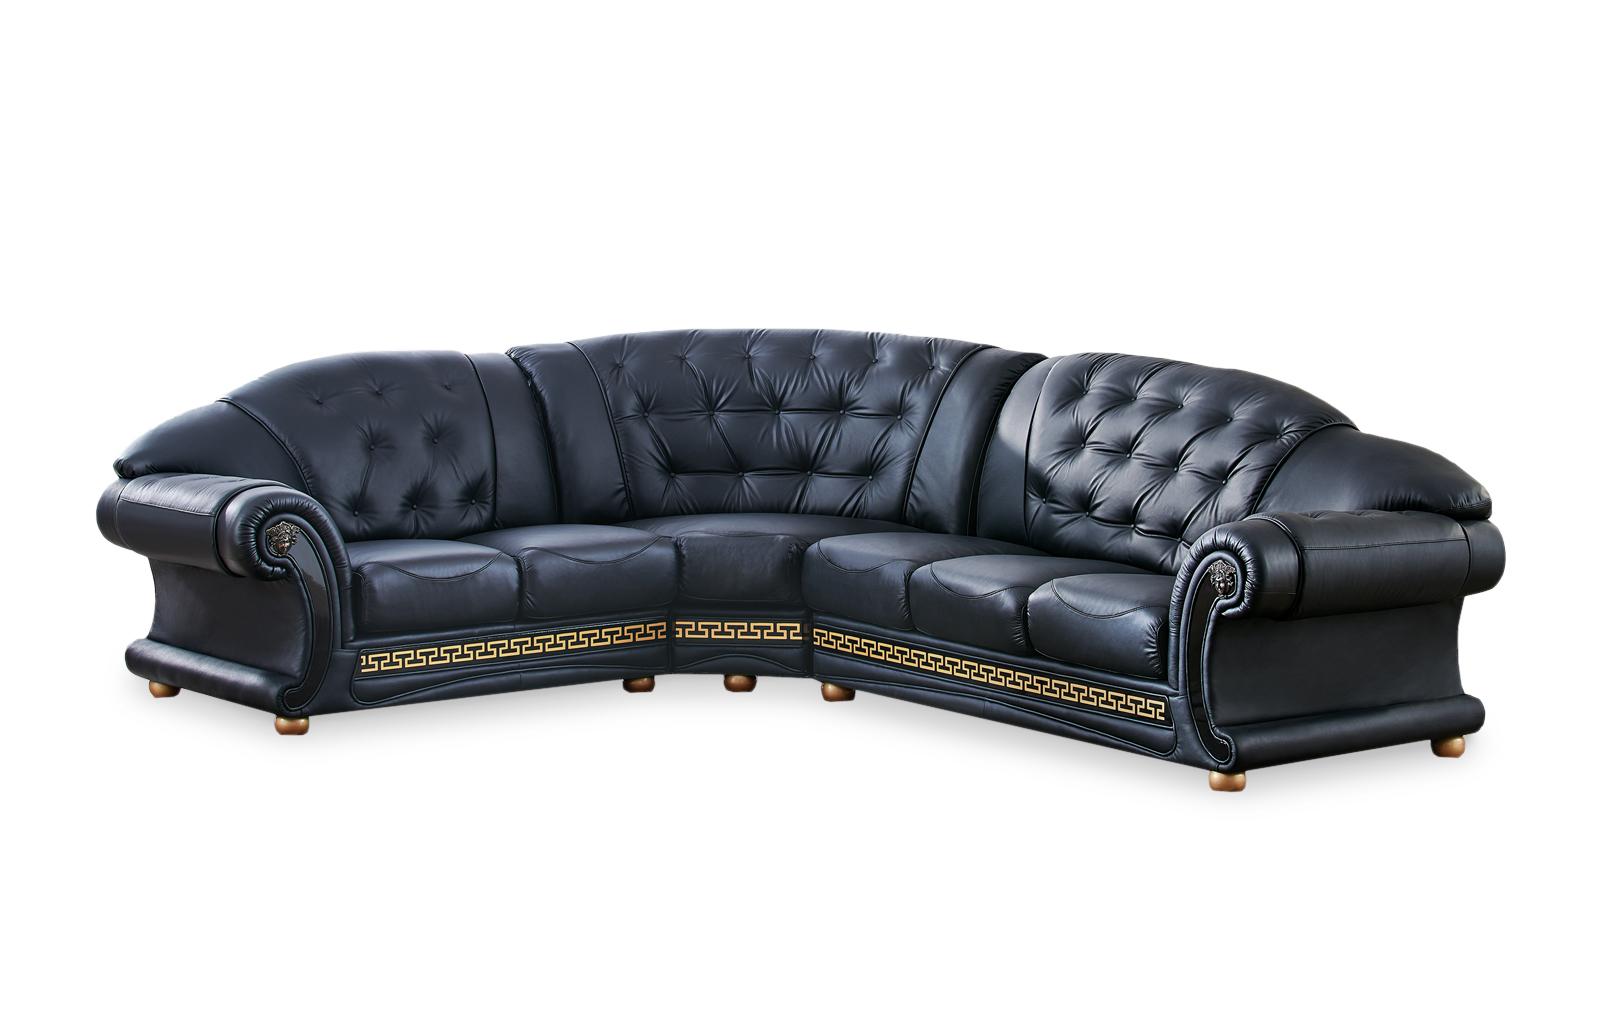 Traditional Sectional Sofa Apolo APOLOSECTLEFTBLACK in Black Top grain leather